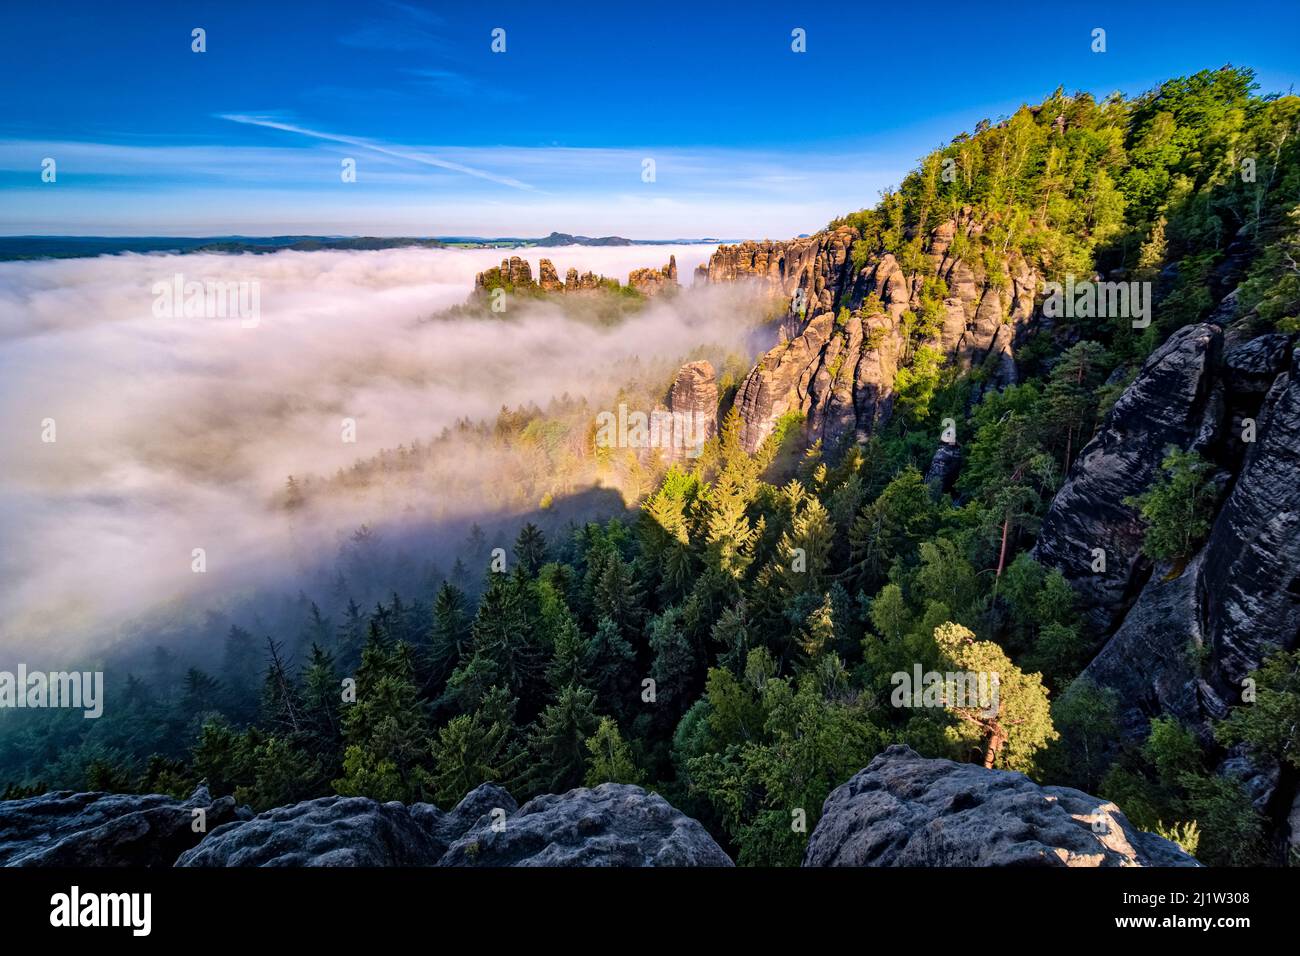 Landscape with rock formations and the Elbe valley covered in fog in Schrammsteine area of the Saxon Switzerland National Park at sunrise. Stock Photo